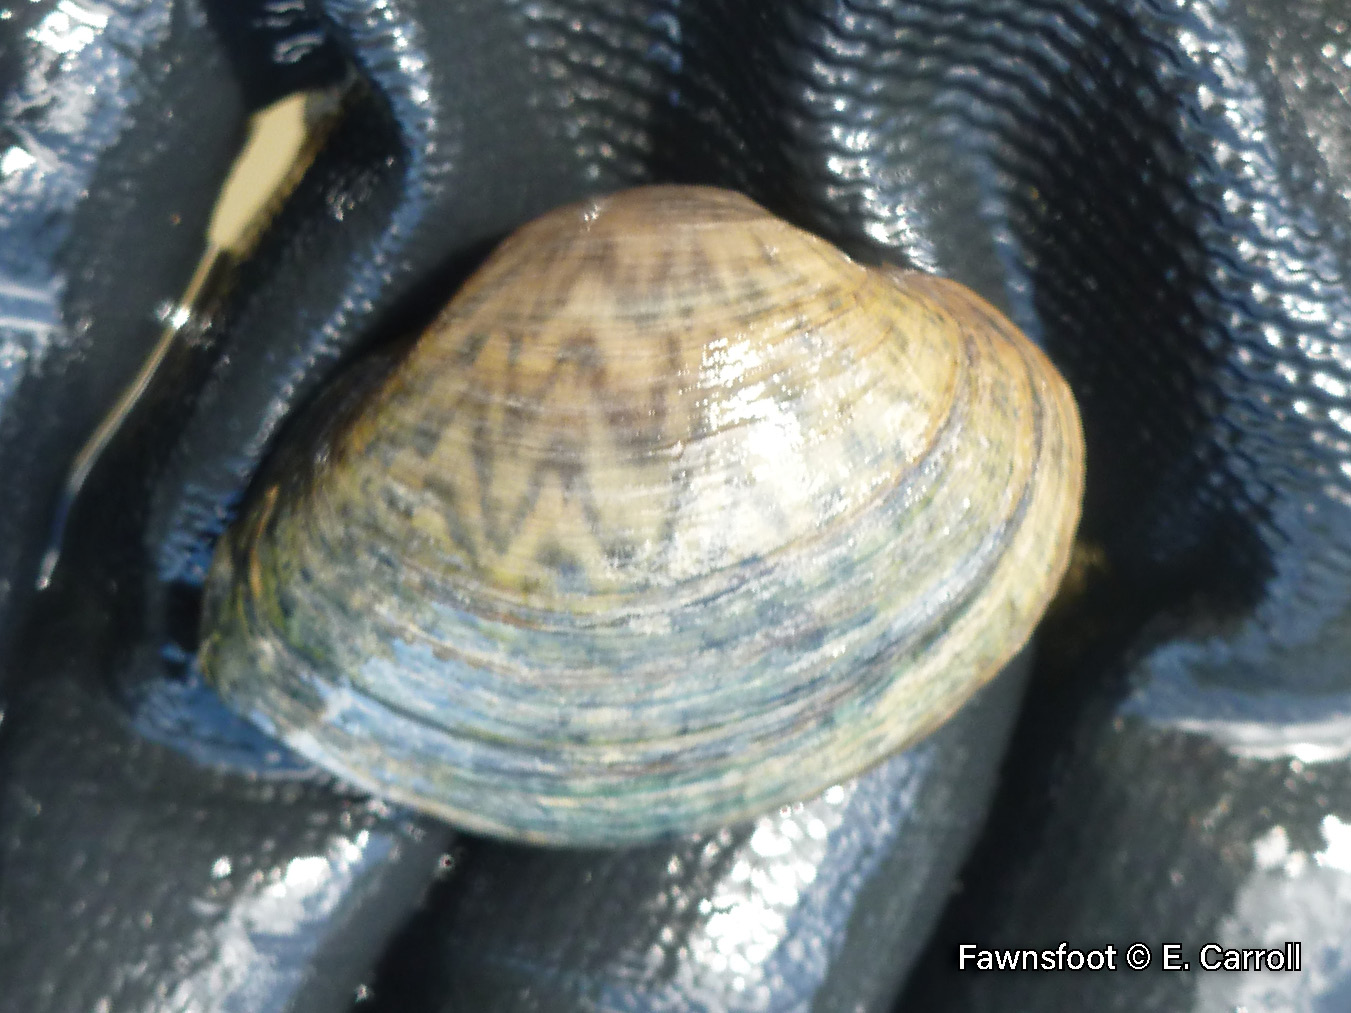 Picture of a Fawnsfoot mussel in a gloved hand, a small, light brown mussel with chevron markings